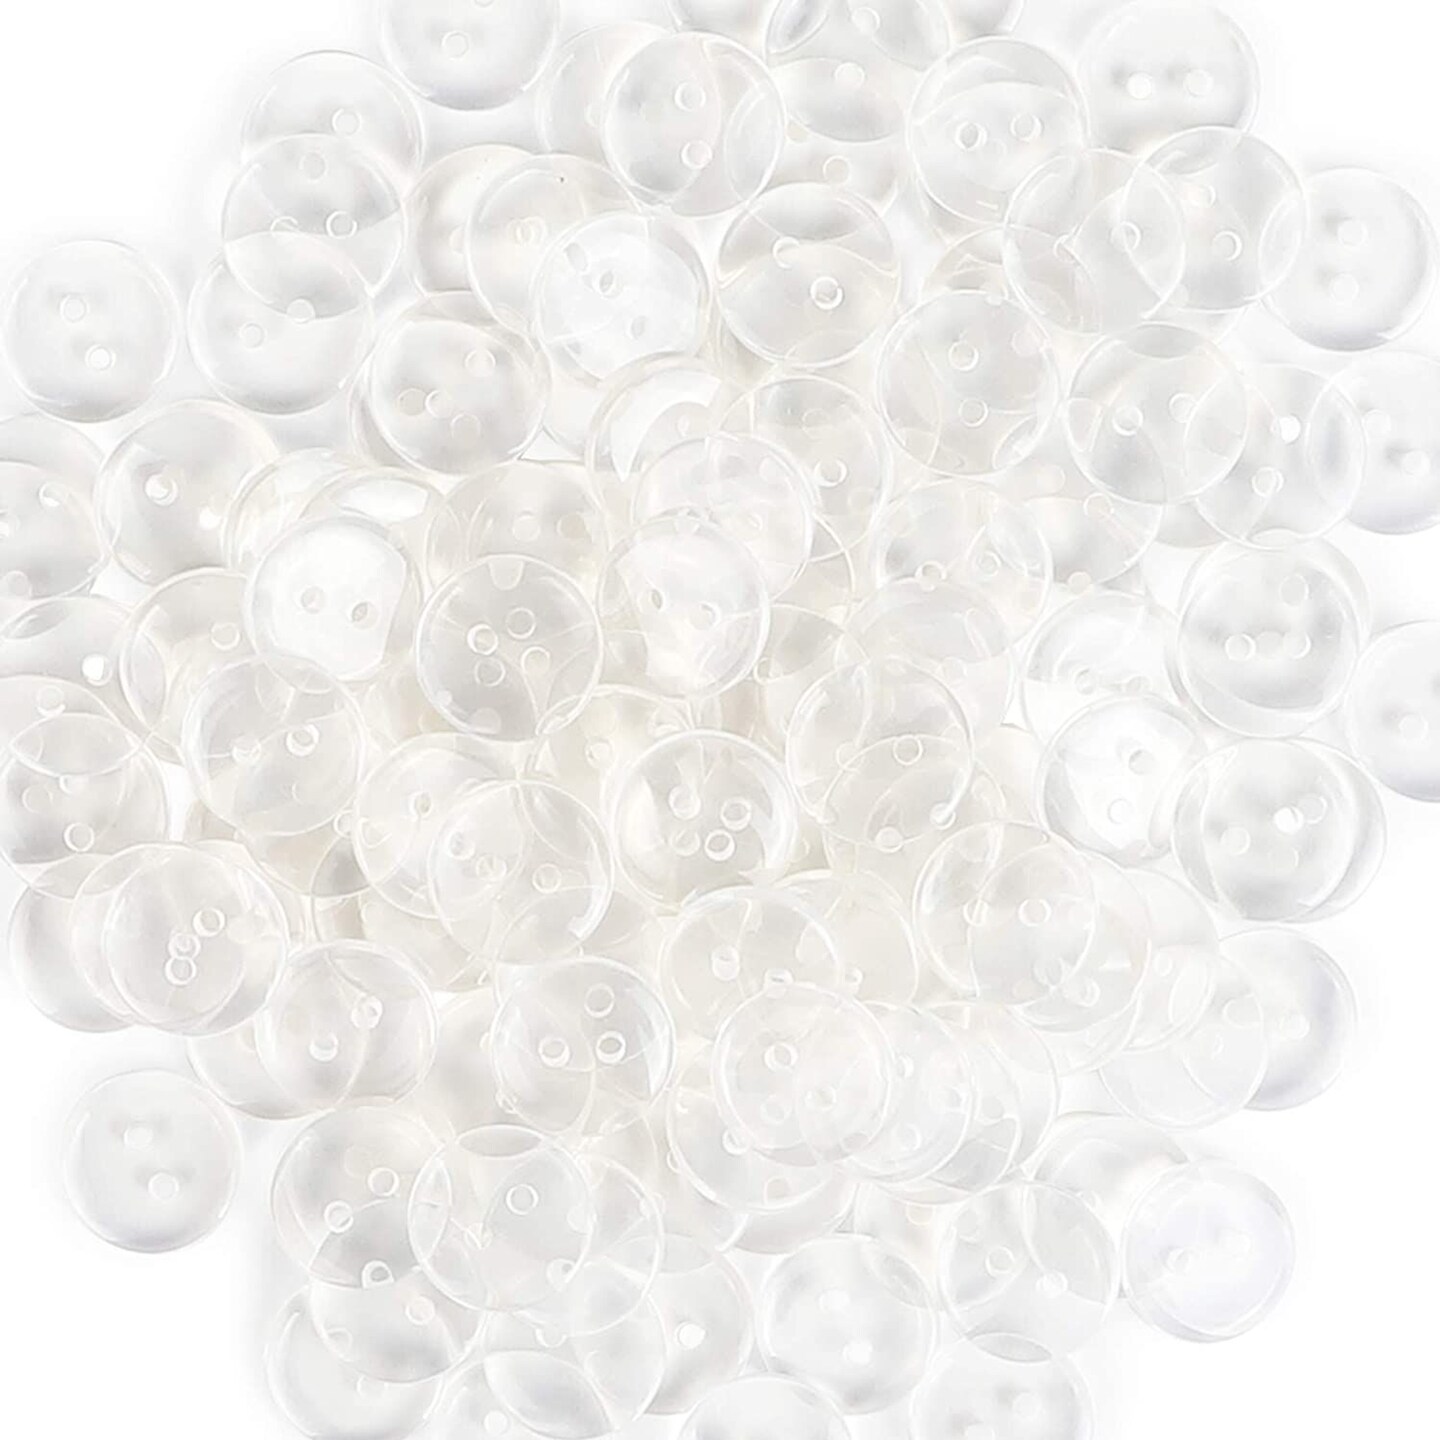 Clear Resin Buttons with 2 Holes for DIY Crafts, Sewing Supplies (10mm,  1000 Pieces)